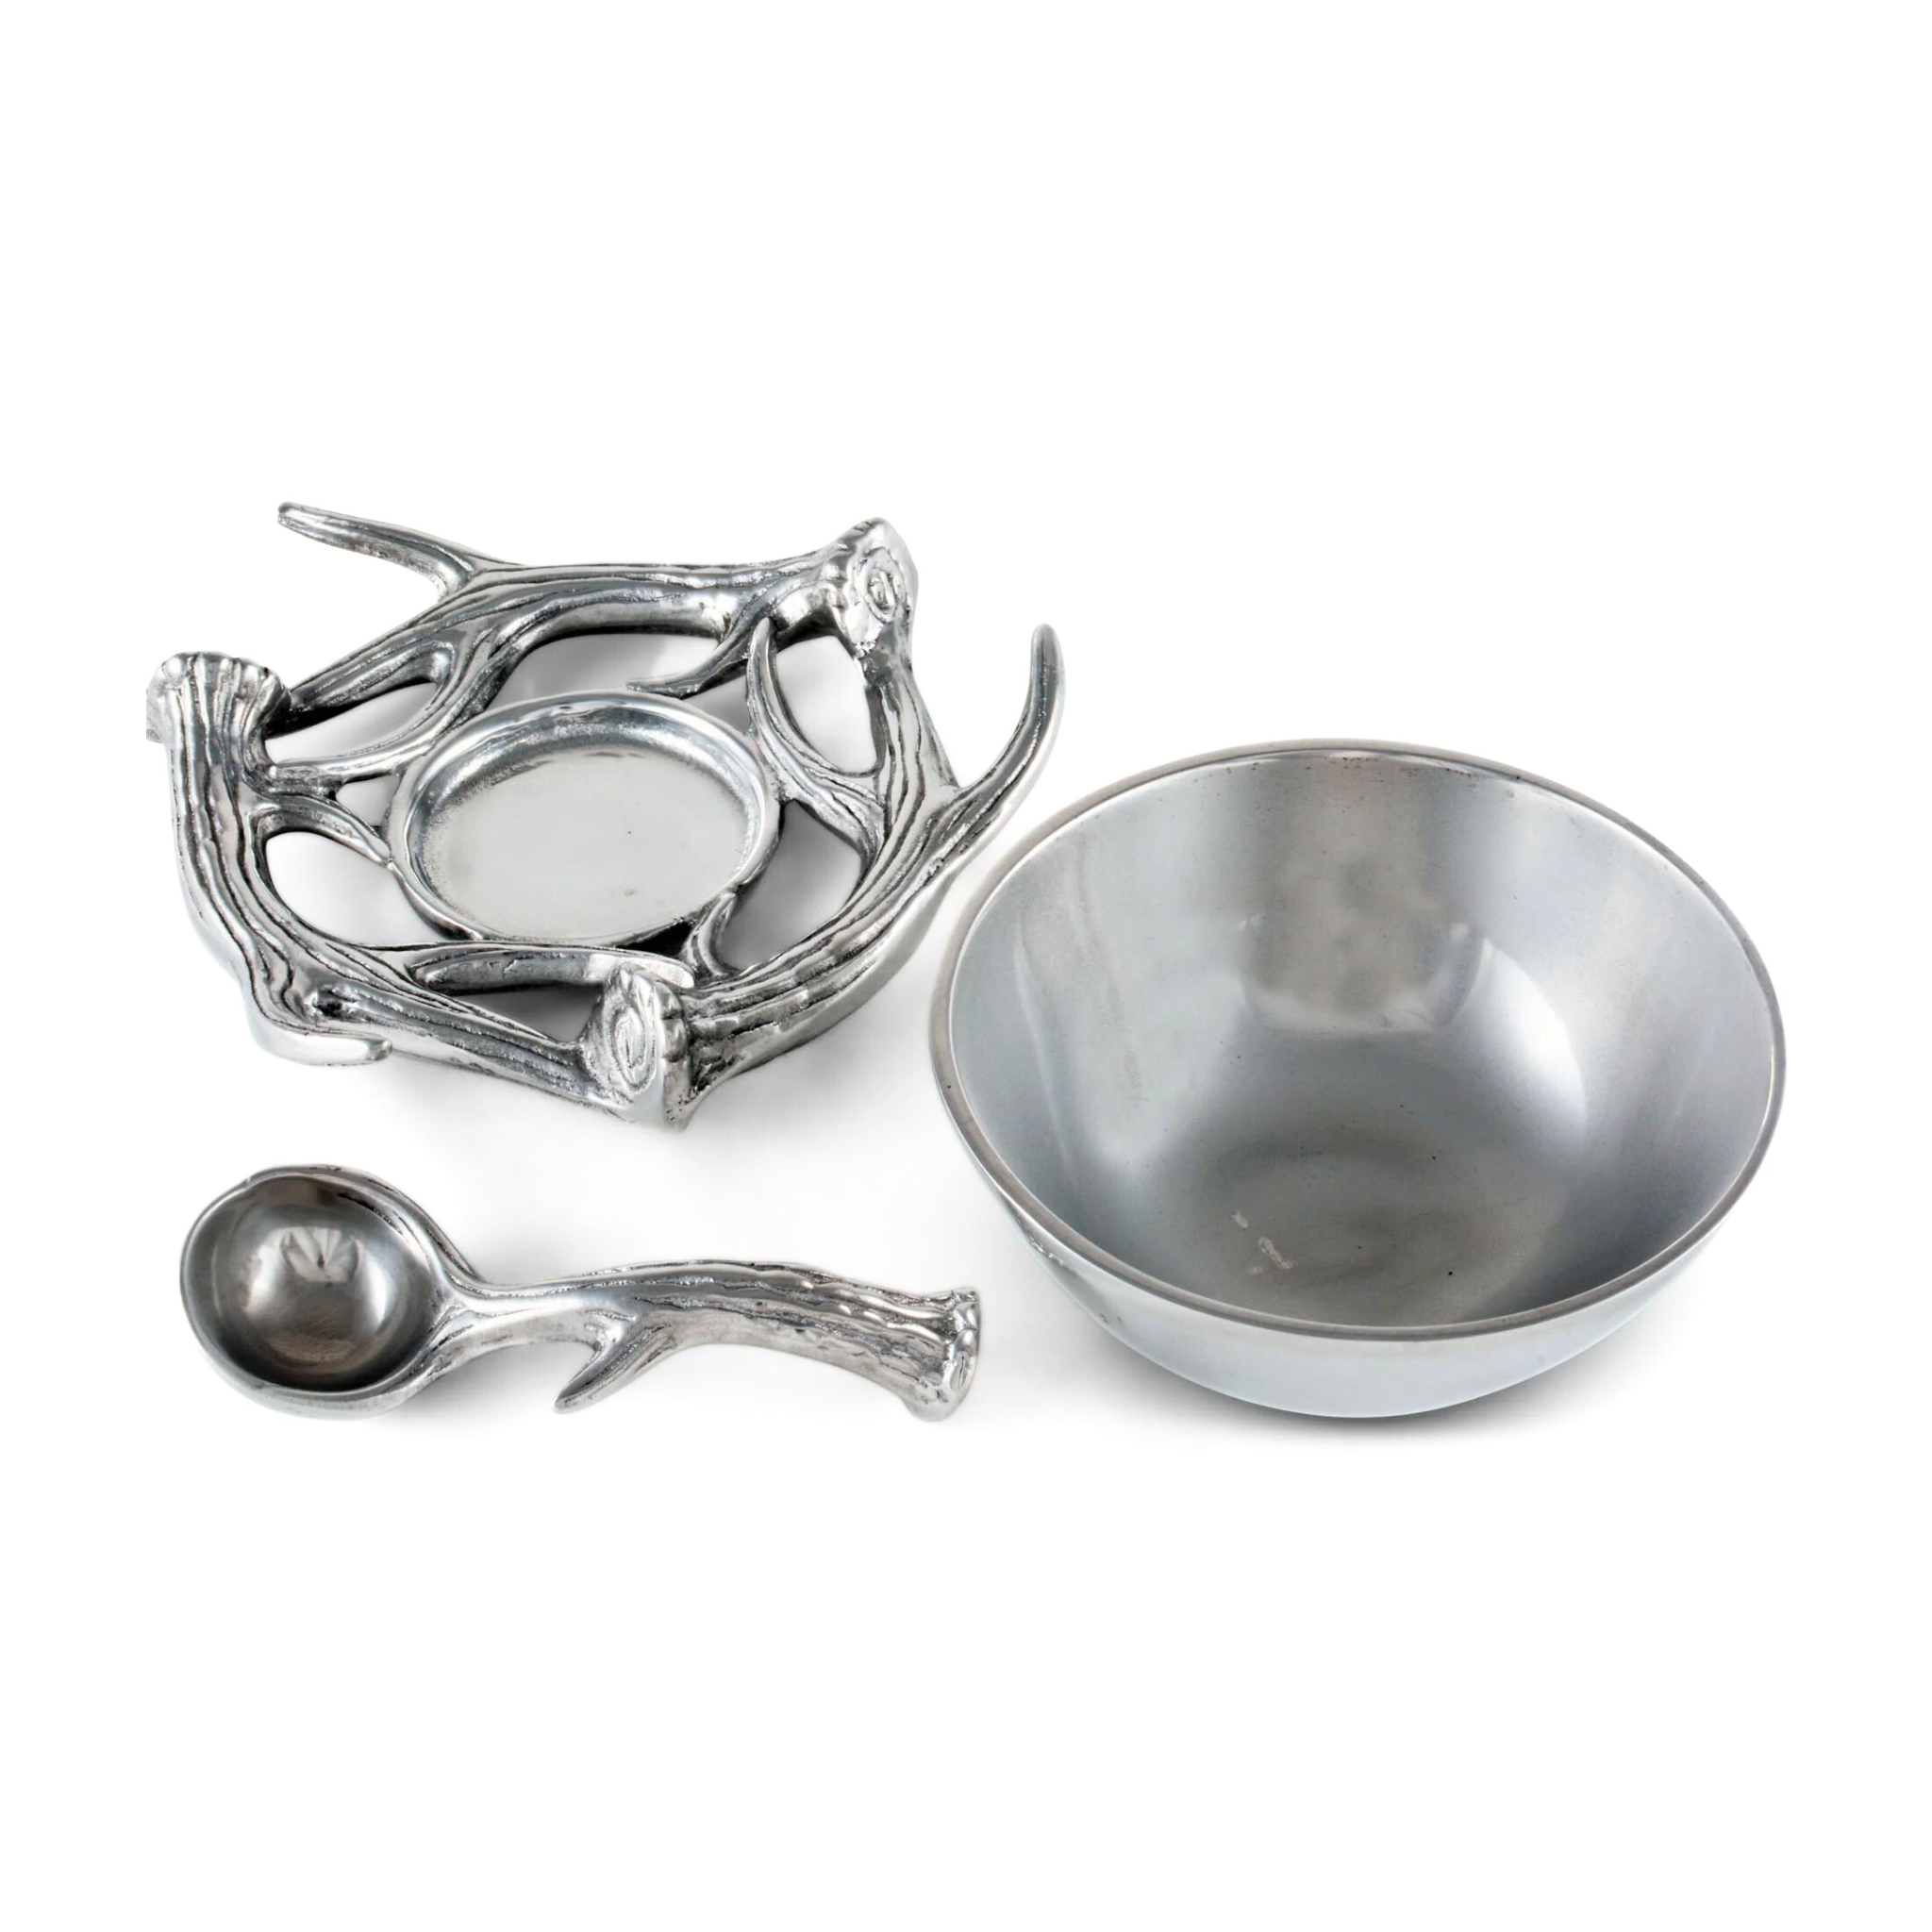 an aluminum serving bowl with antler base and spoon laid out rest on a white surface